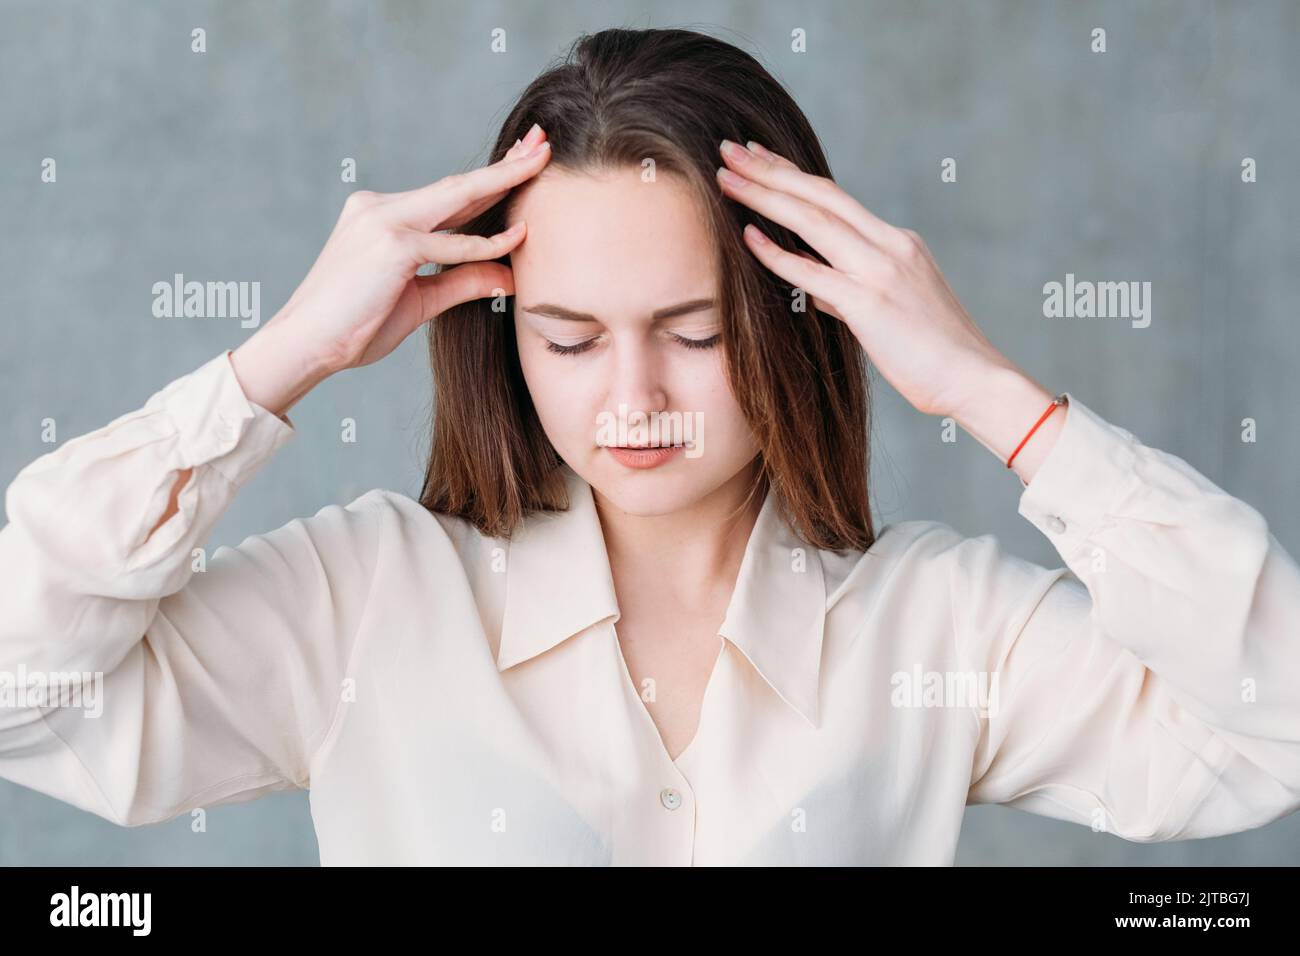 concerned professional concentration young woman Stock Photo